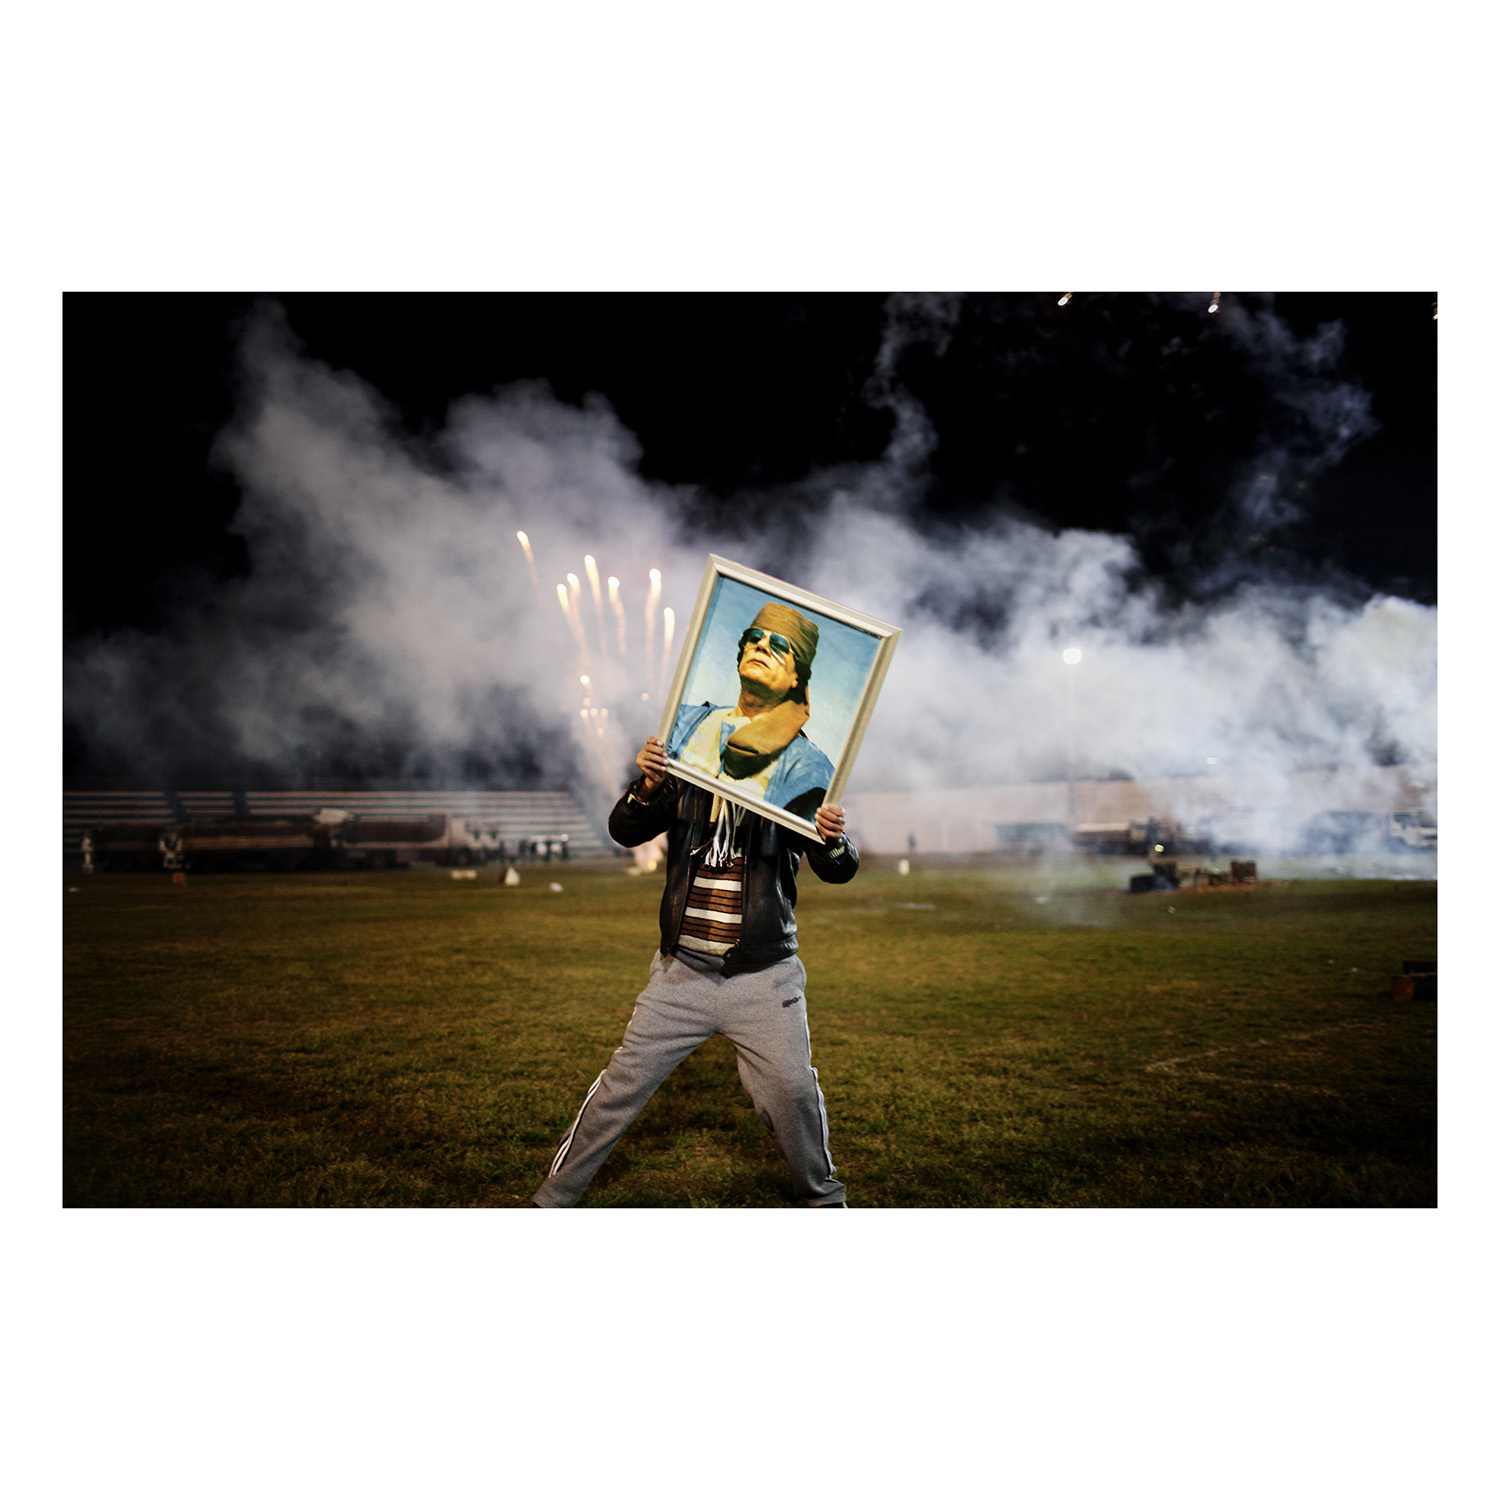 LIBYA. March 9, 2011. A Qaddafi supporter holds a portrait of the Libyan leader as fireworks go up in the background on a soccer field in a suburb of Zawiyah where government minders took a group of foreign journalists to attend a staged celebration.